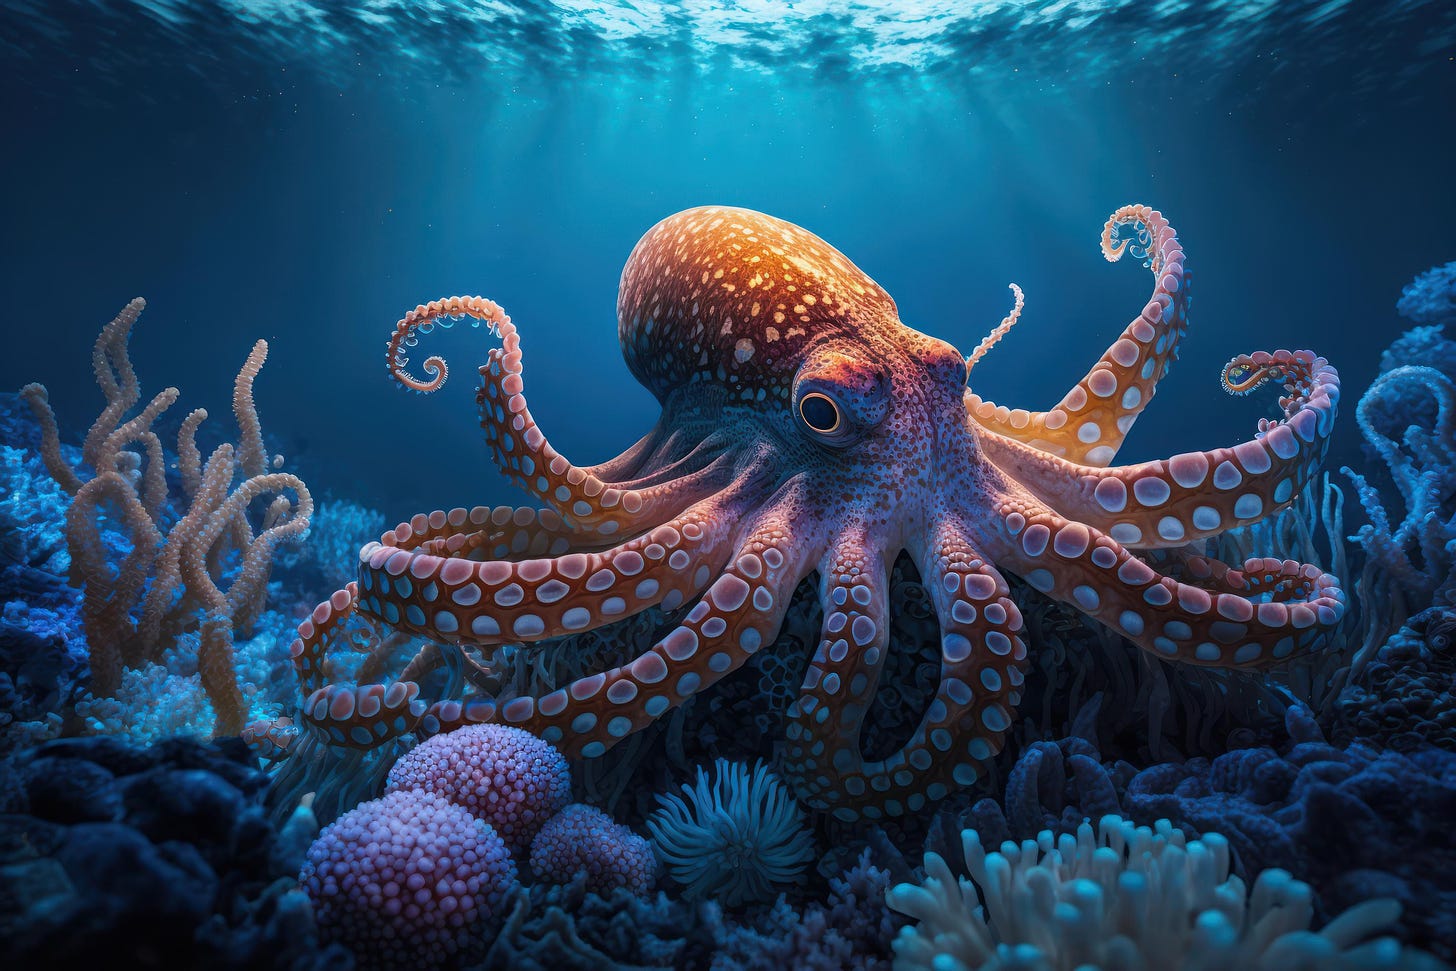 Octopus may experience REM sleep, and dream, much like we do